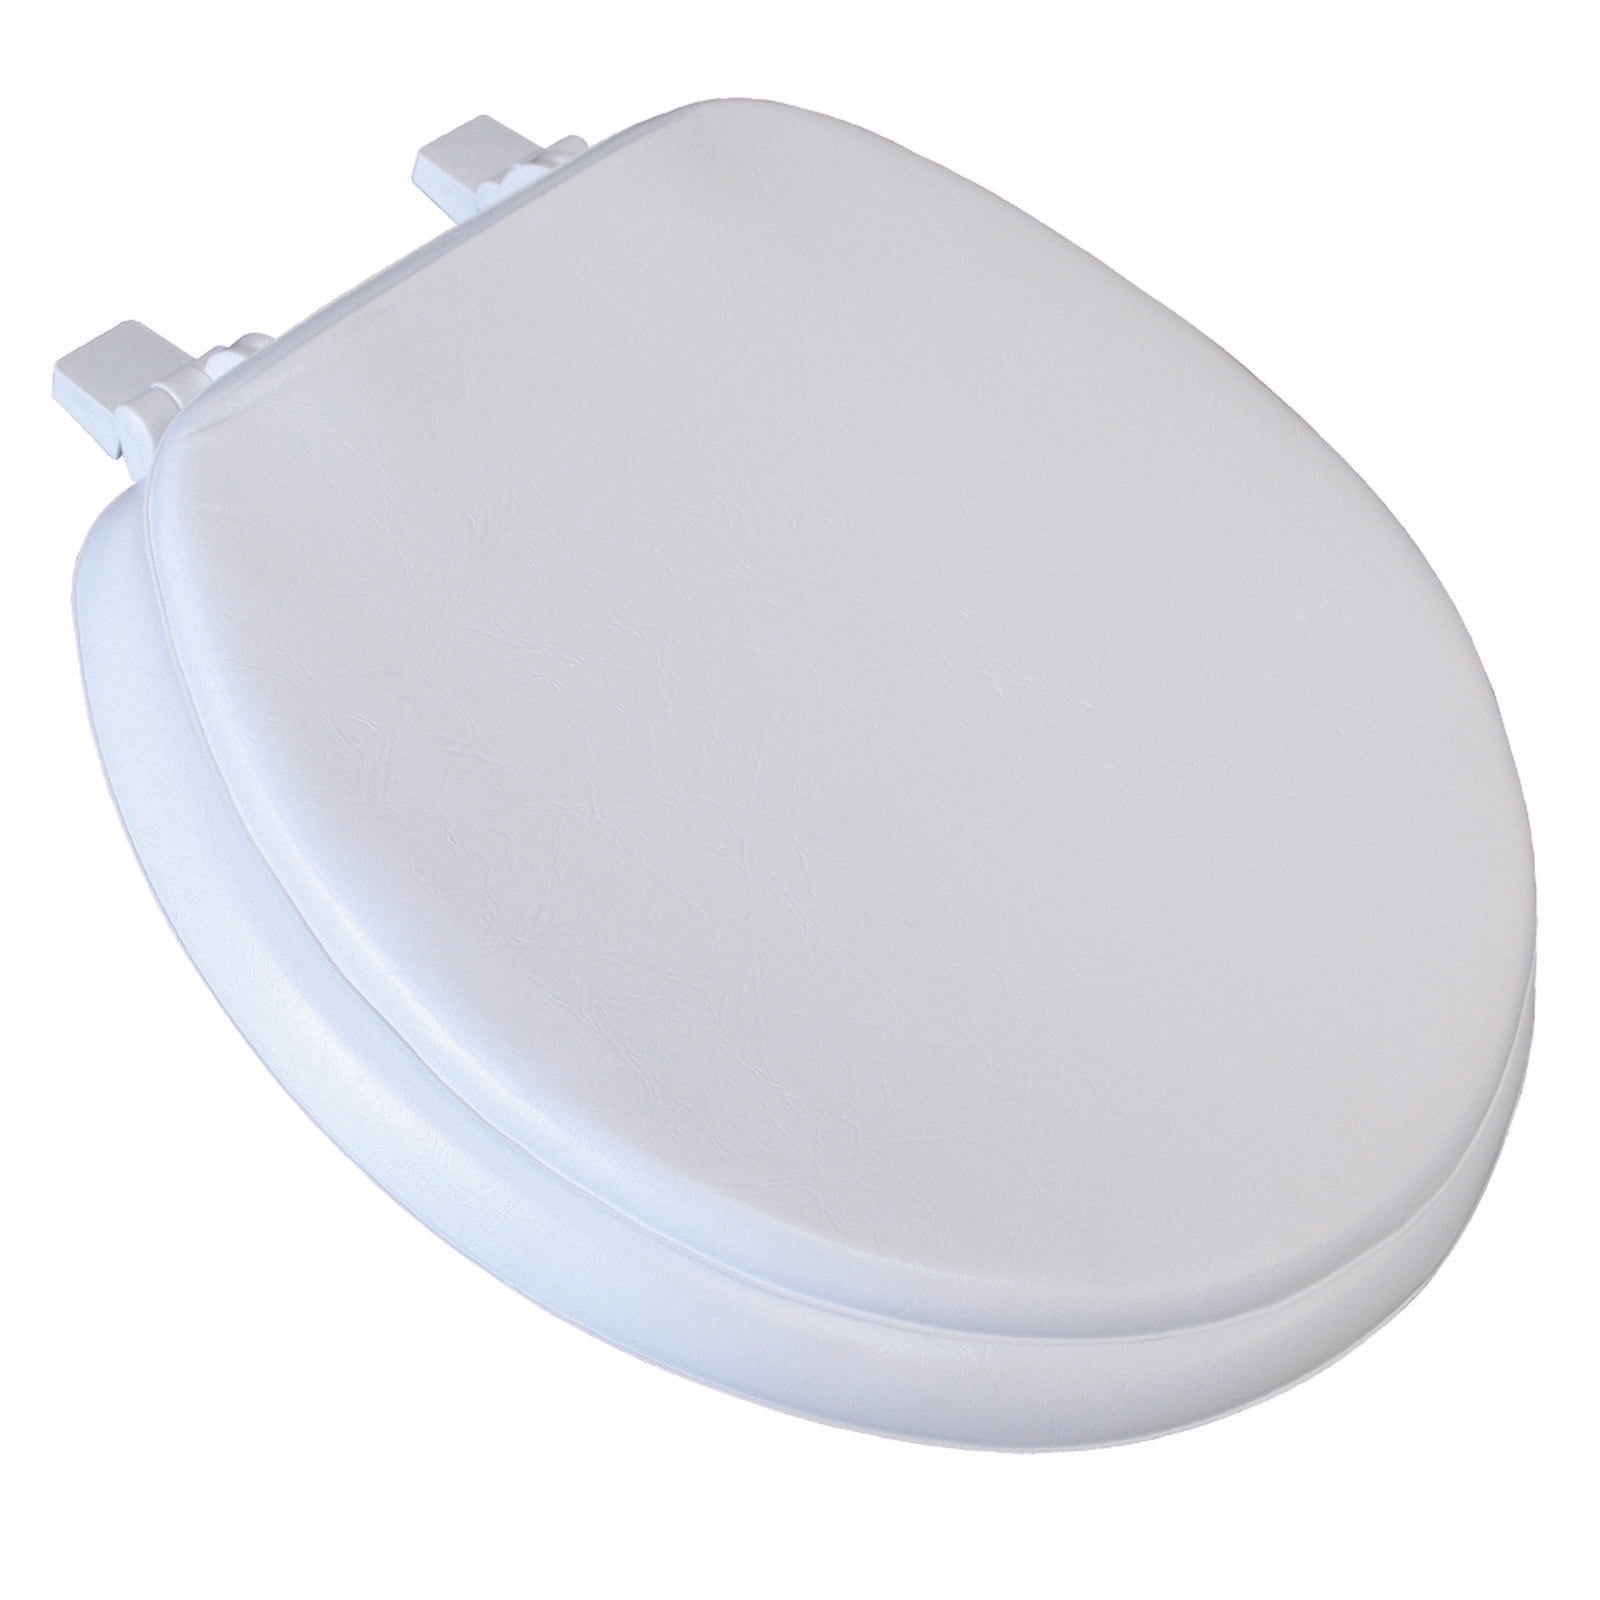 DMI Vinyl Cushion 4 in. Round Front Toilet Seat in White 520-1247-1900 -  The Home Depot